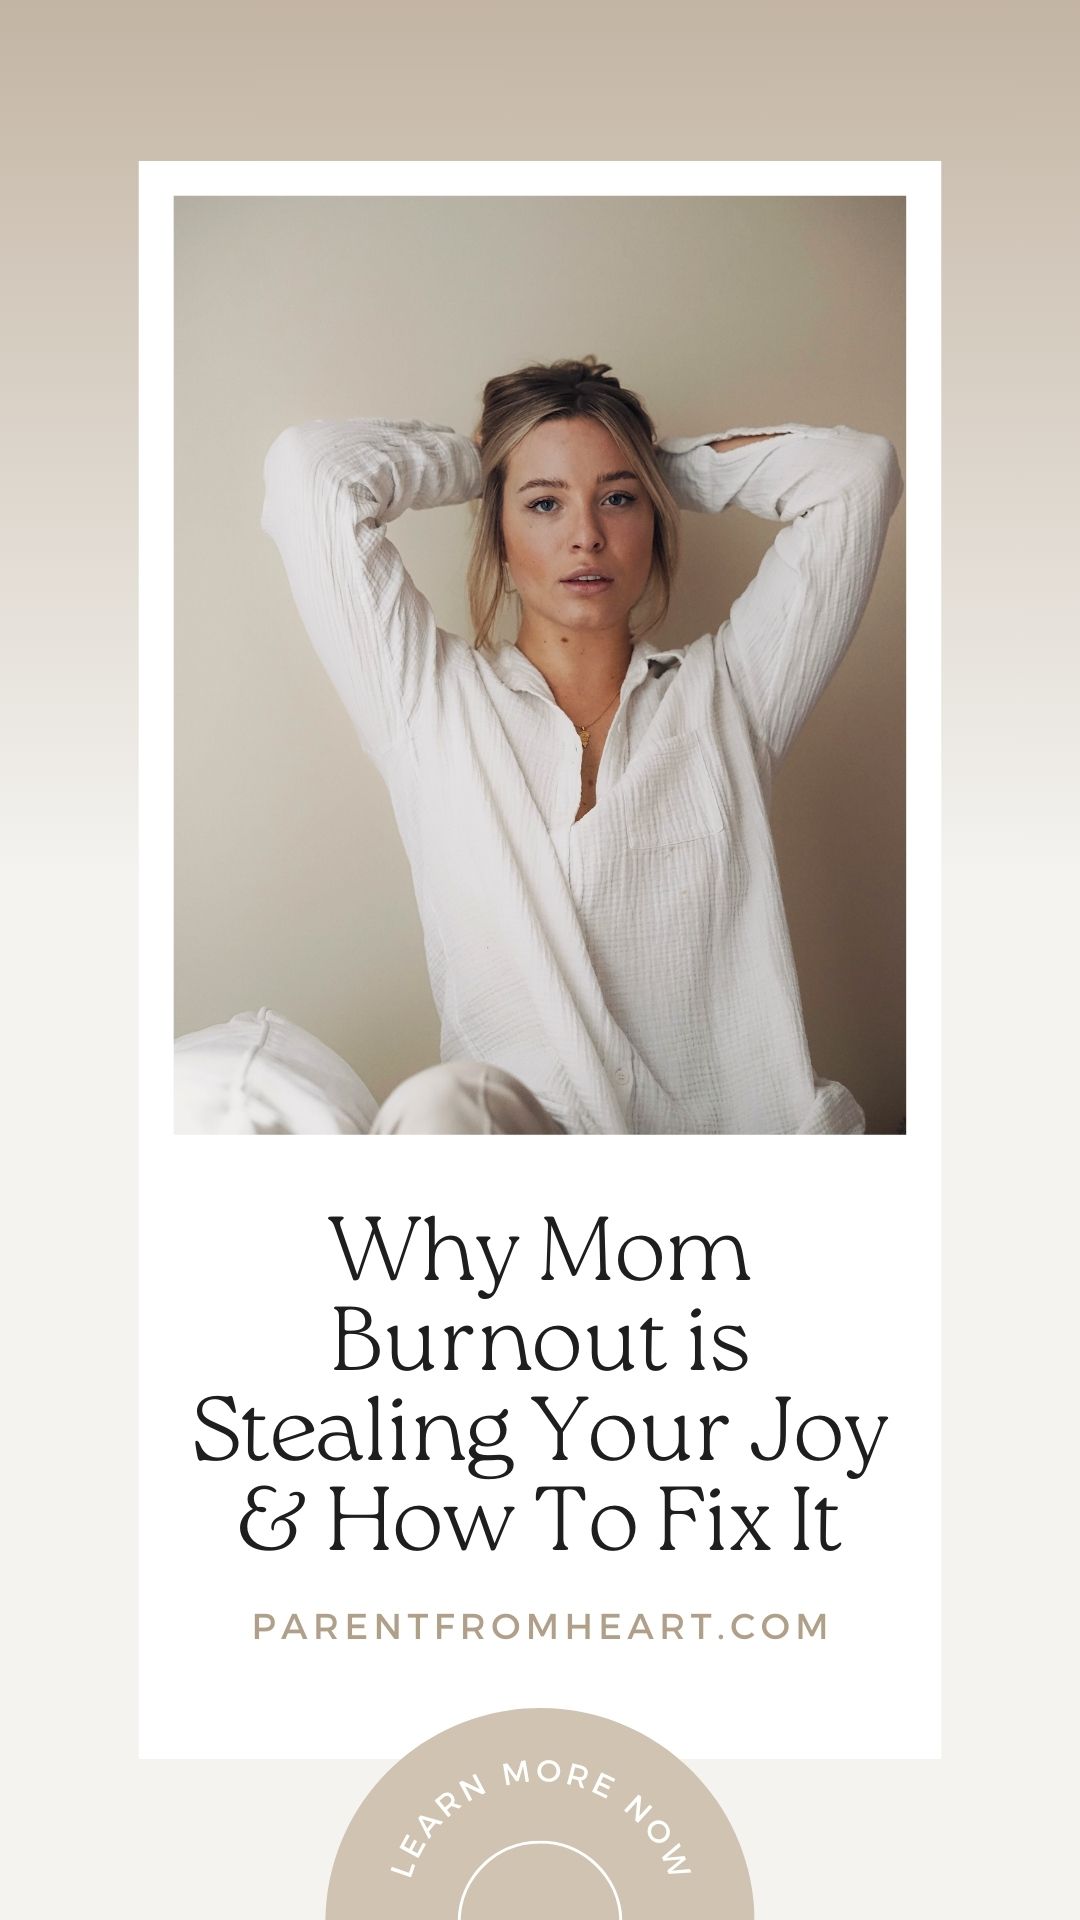 Why Mom Burnout is Stealing Your Joy and How to Fix It